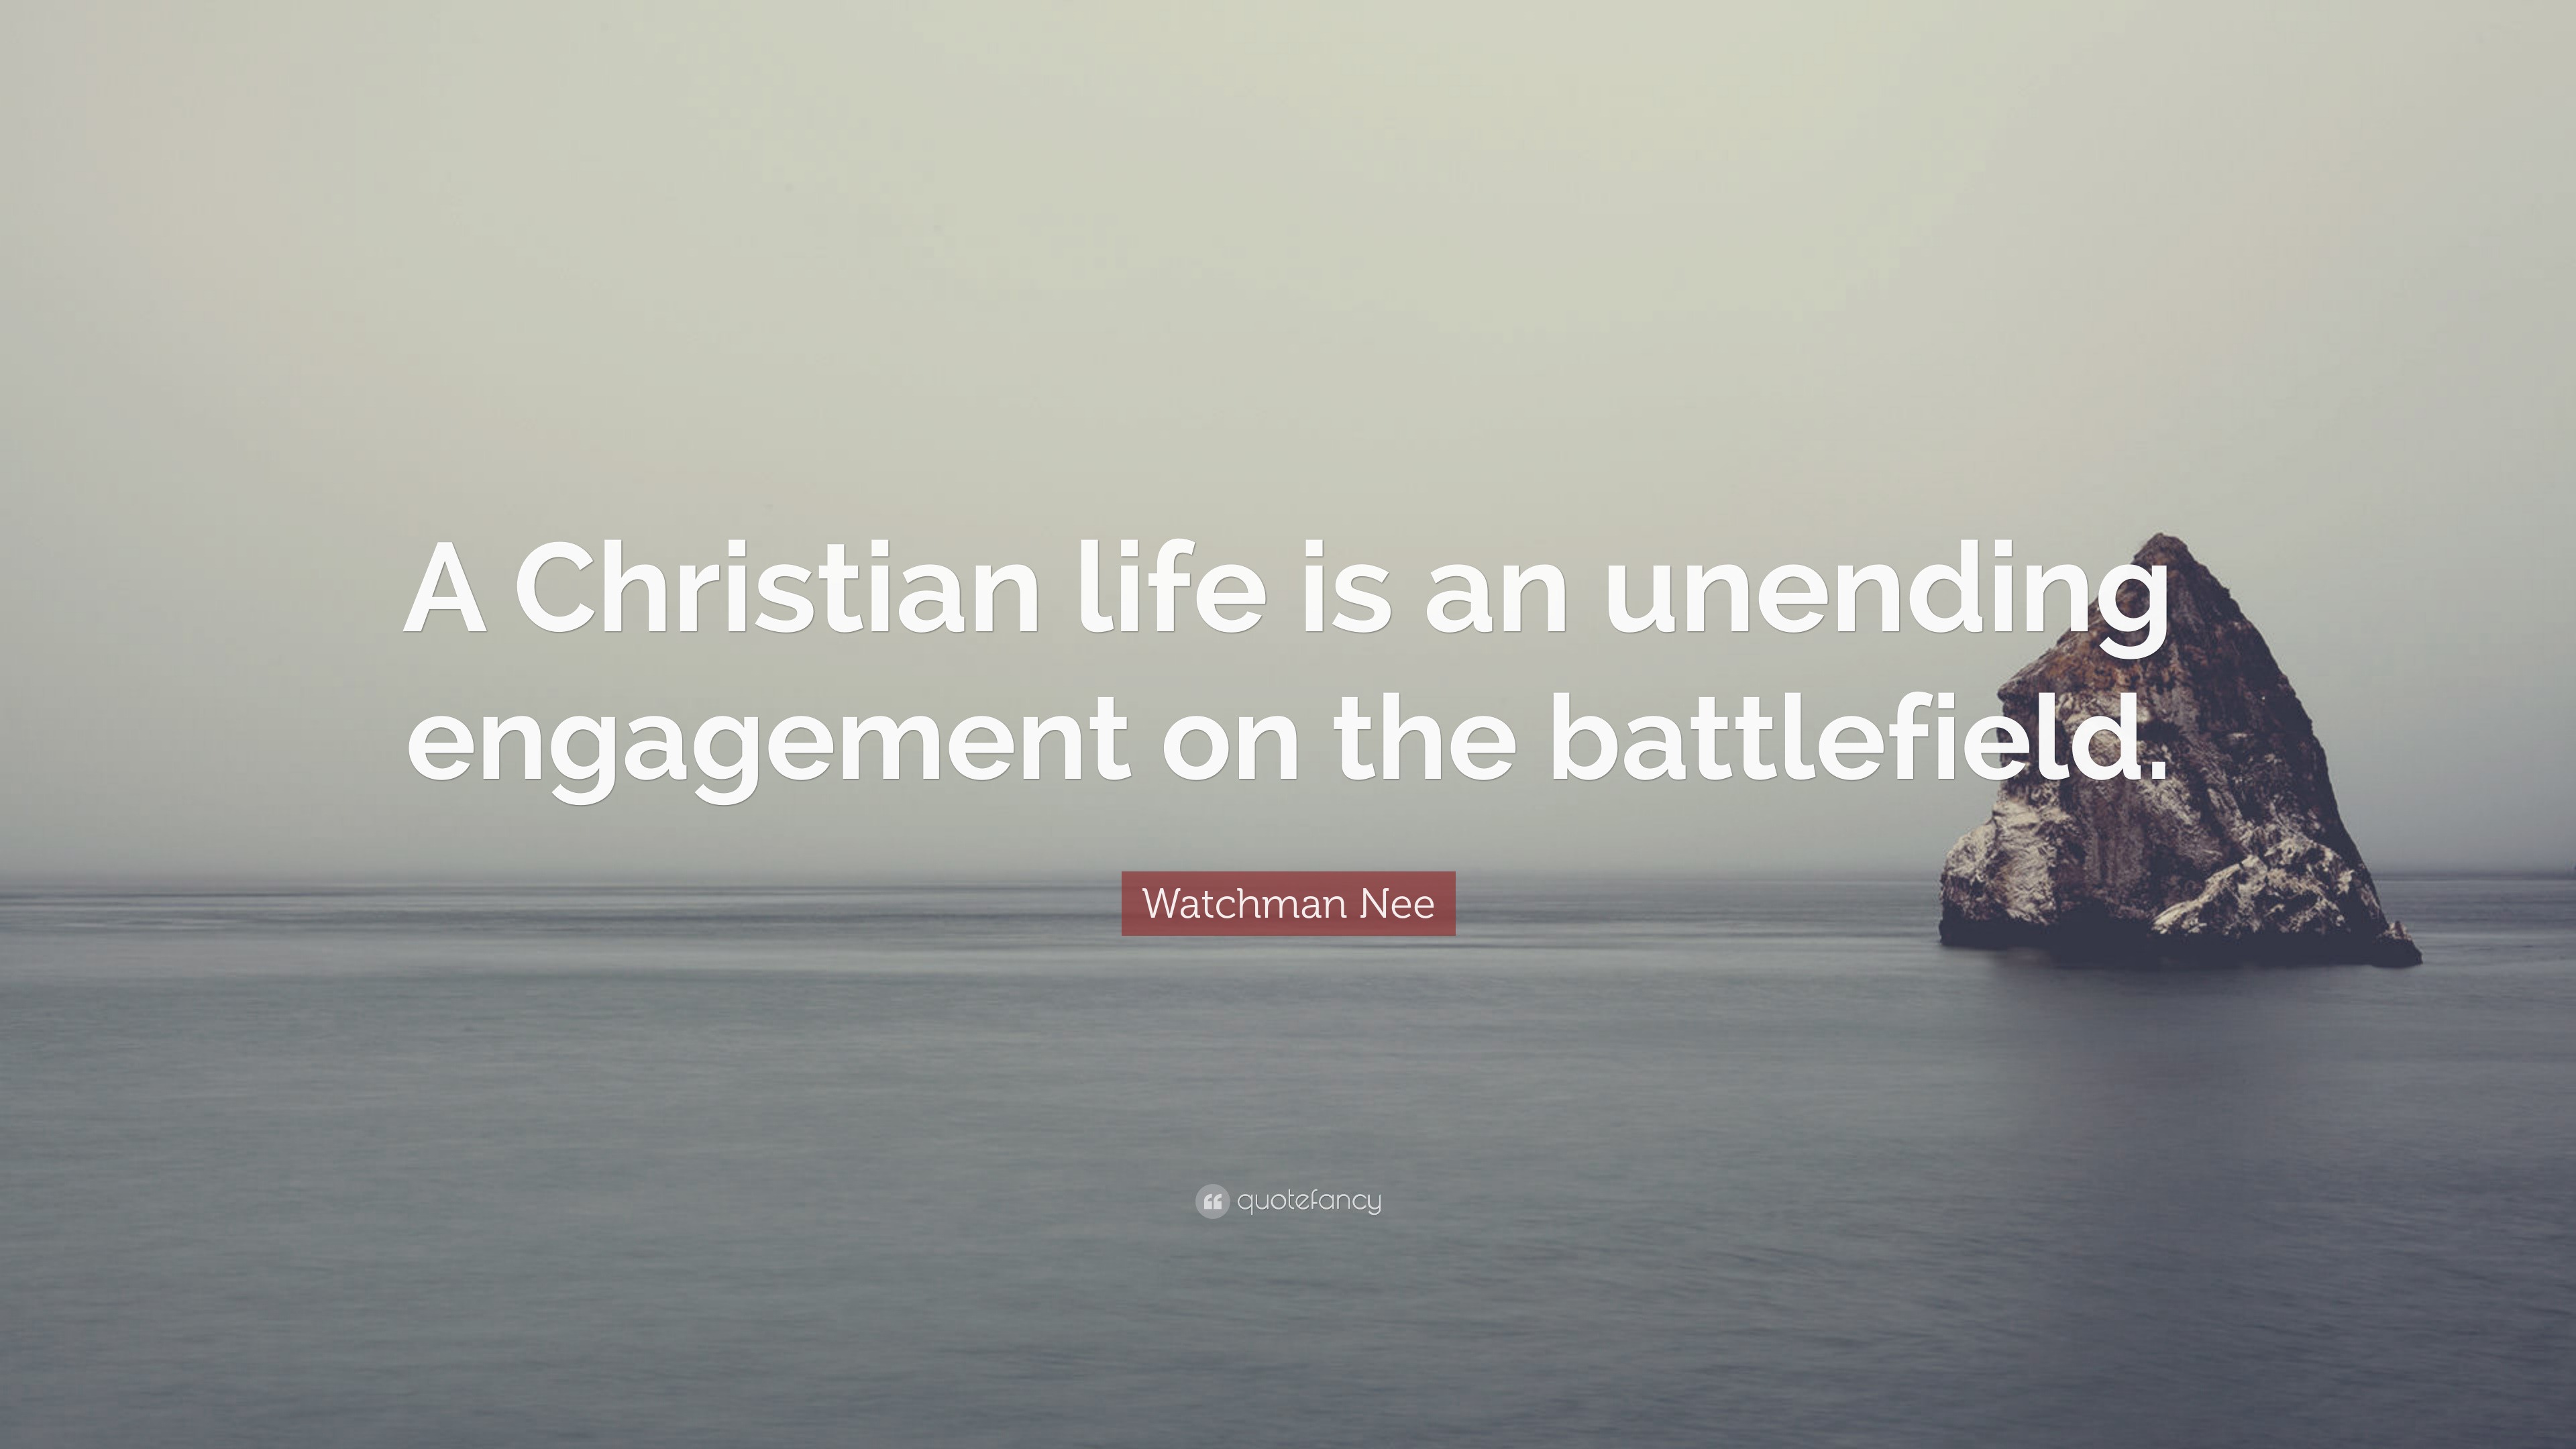 Watchman Nee Quote: "A Christian life is an unending ...